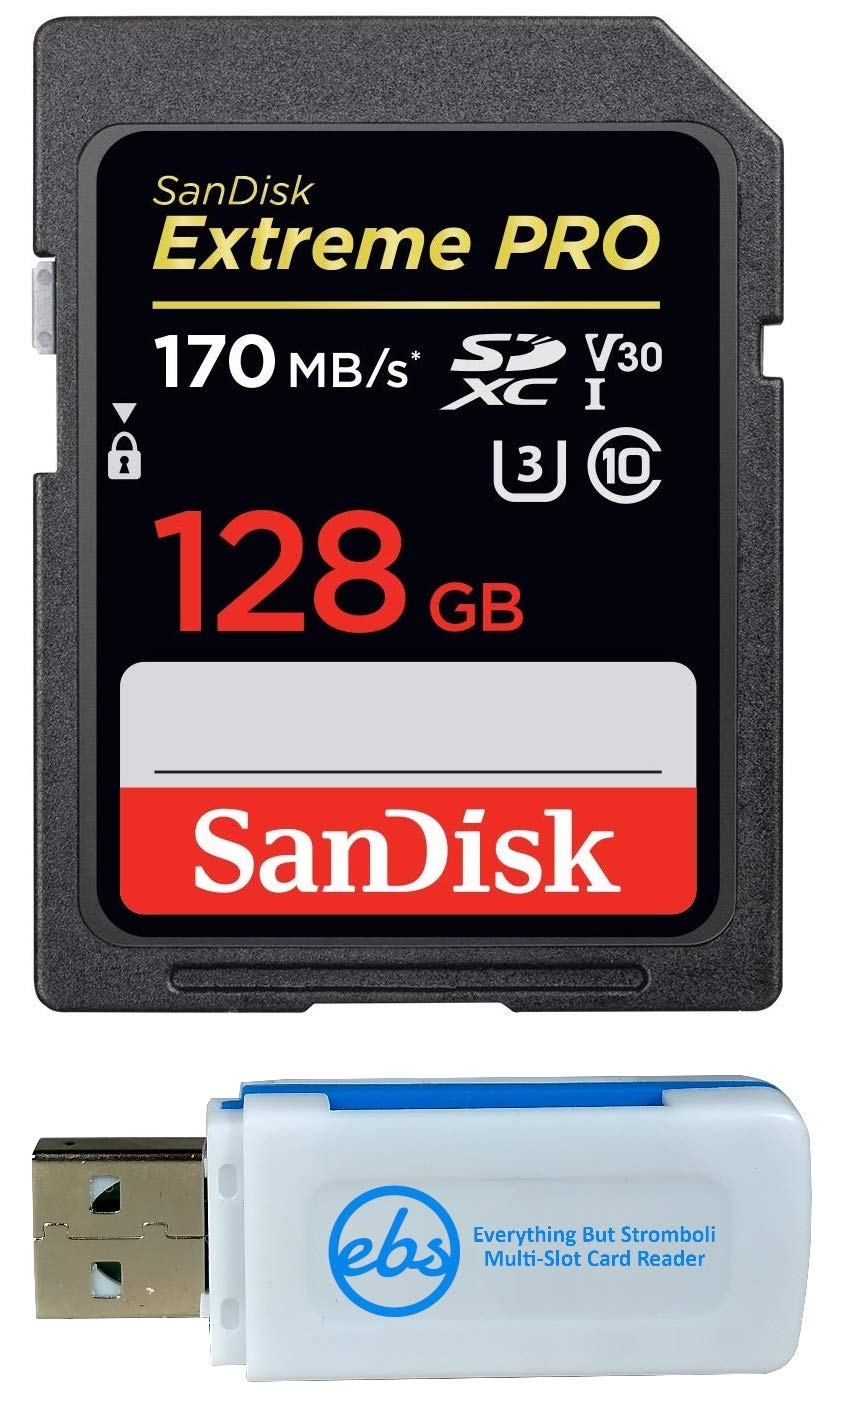 SanDisk 128GB SDXC Extreme Pro Memory Card Bundle Works with Olympus OM-D E-M10 Mark II, Pen E-PL9 Mirrorless Camera 4K V30 (SDSDXXY-128G-GN4IN) Plus (1) Everything But Stromboli TM Combo Card Reader